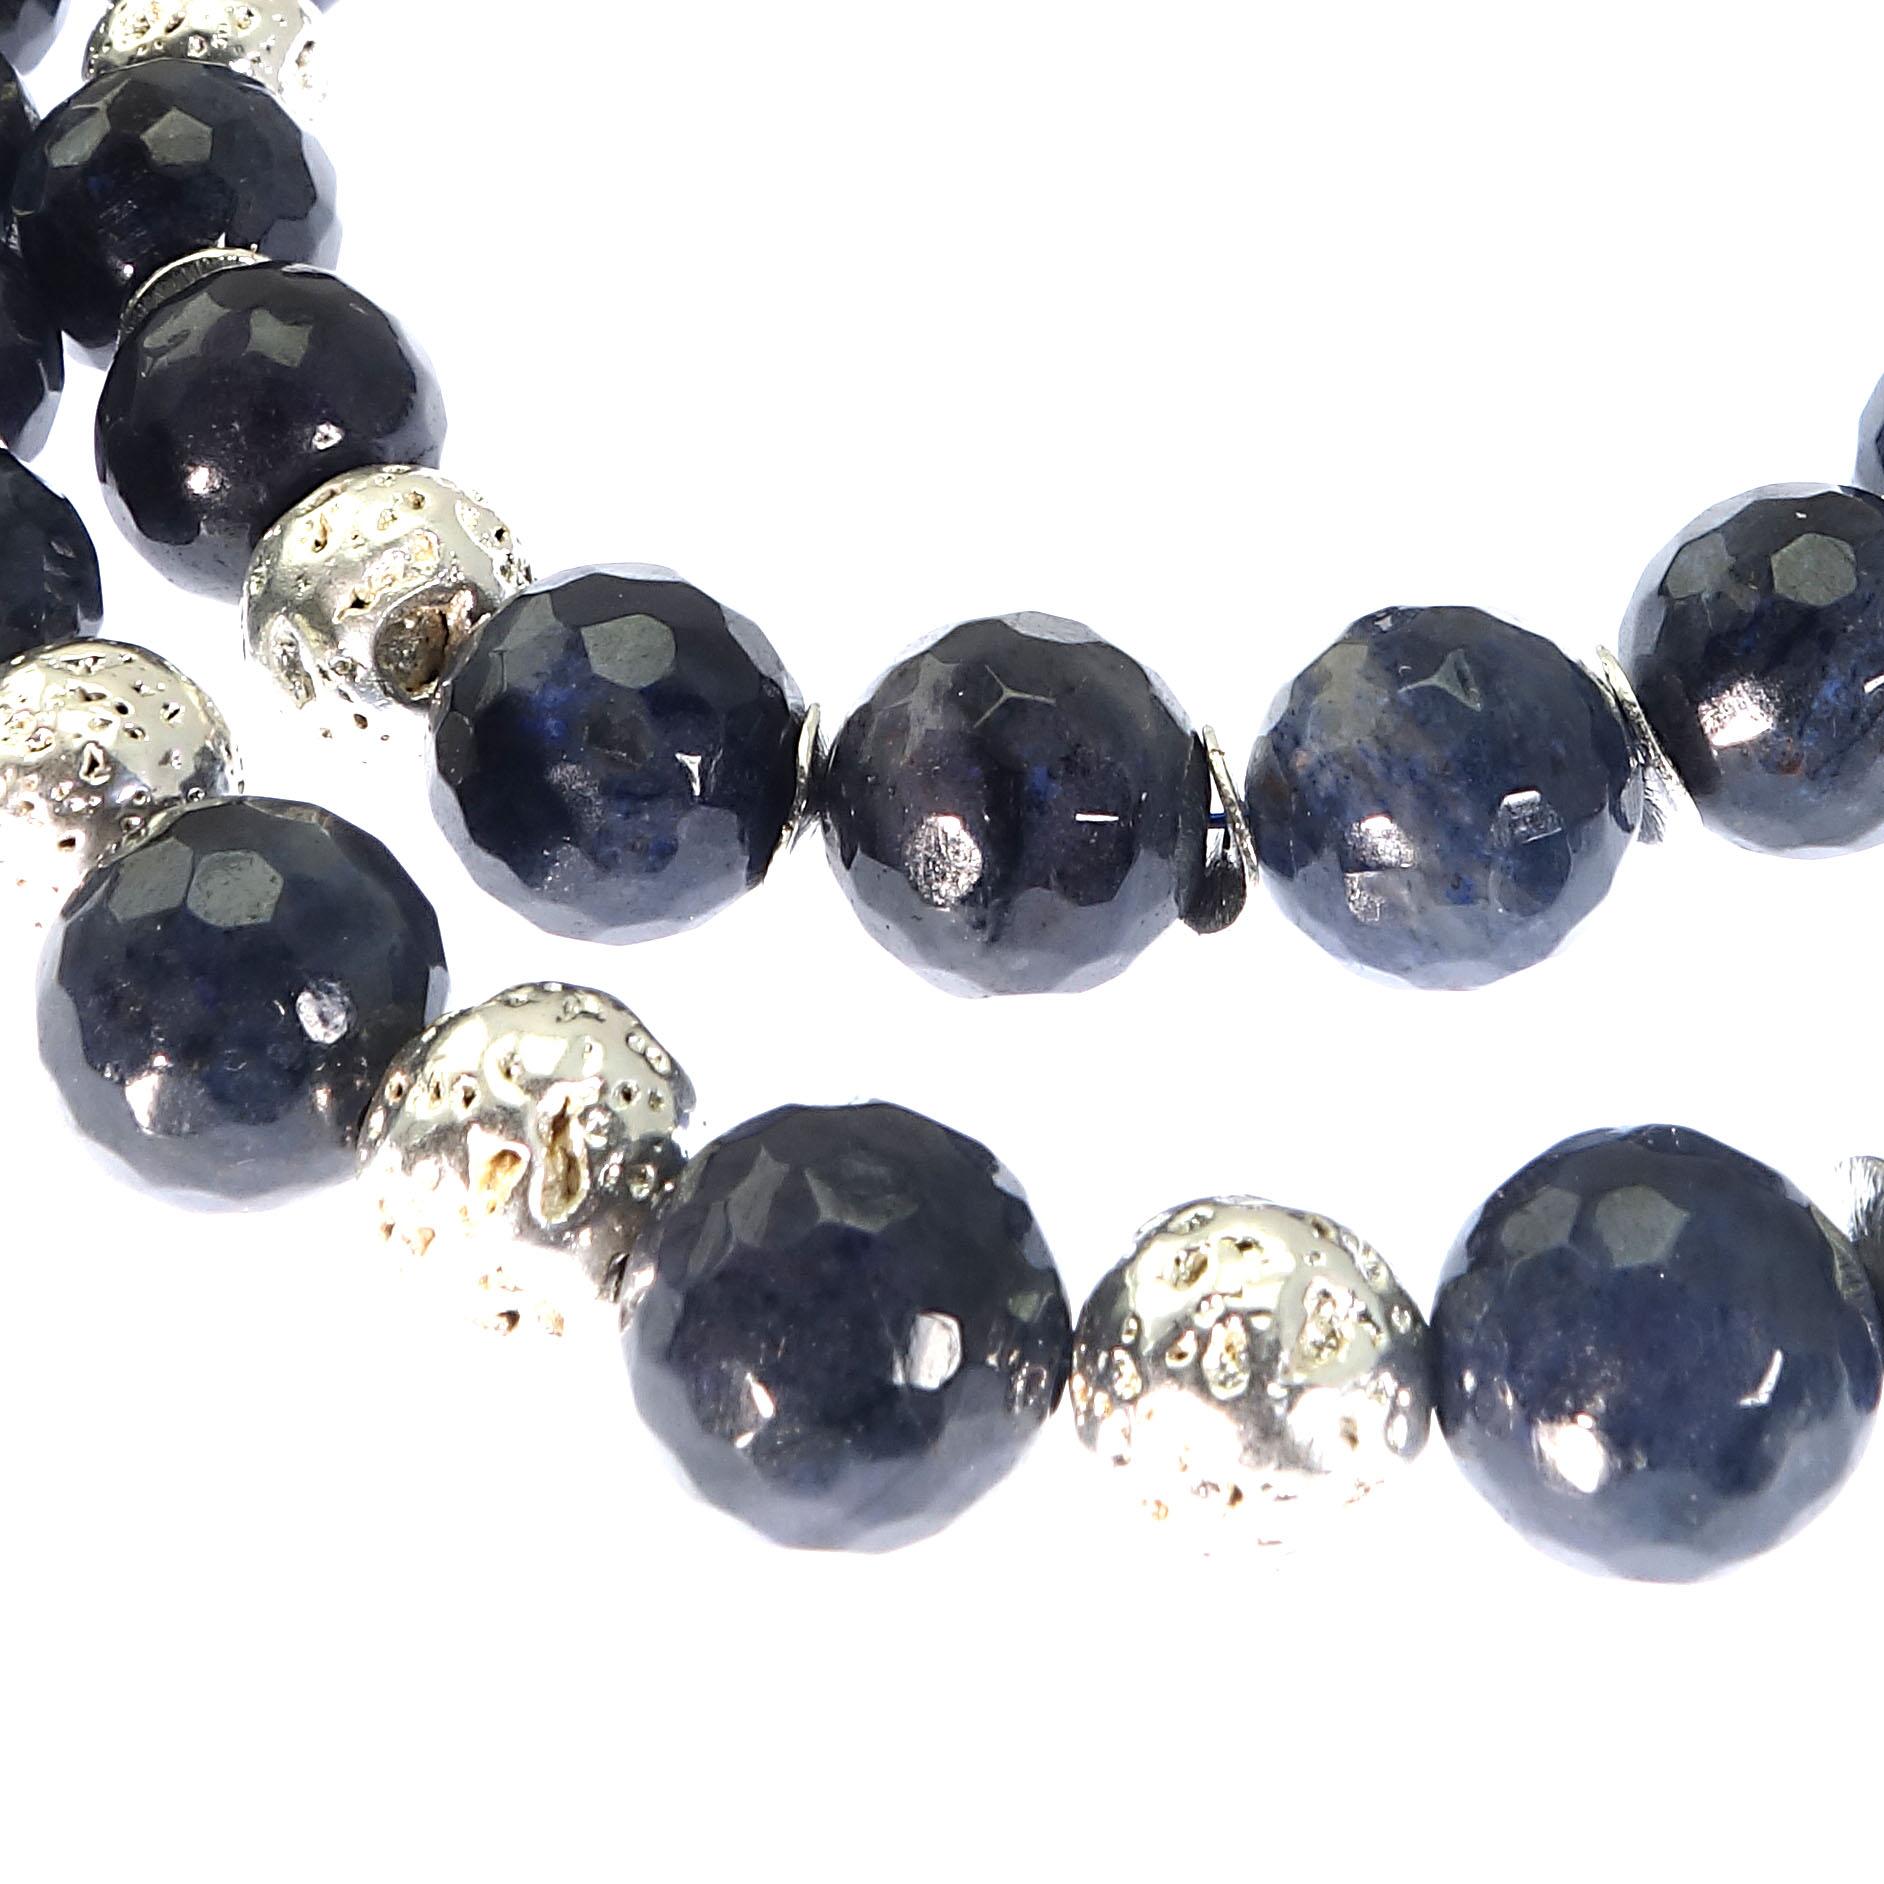 Handmade necklace of highly polished, faceted blue Dumortierite enhanced with sparkling silver 'lava' beads and silver tone flutters. This double strand necklace is a must have for all you blue lovers. Dumortierite ranges from lighter blue to dark